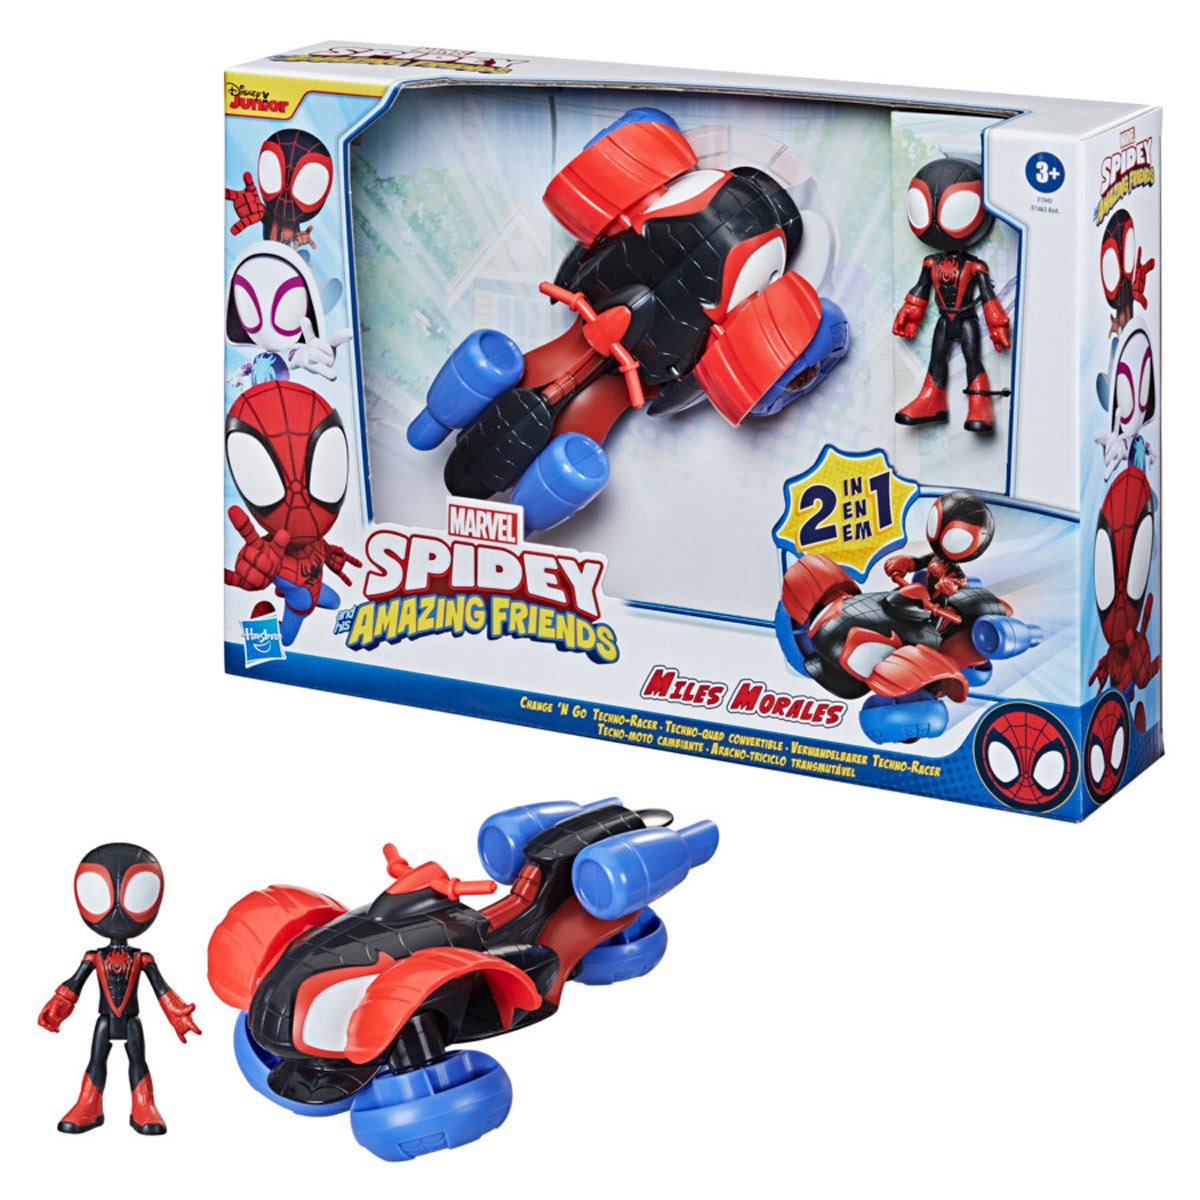 Spider-Man Spidey and His Amazing Friends Change 'N Go Techno-Racer Vehicle